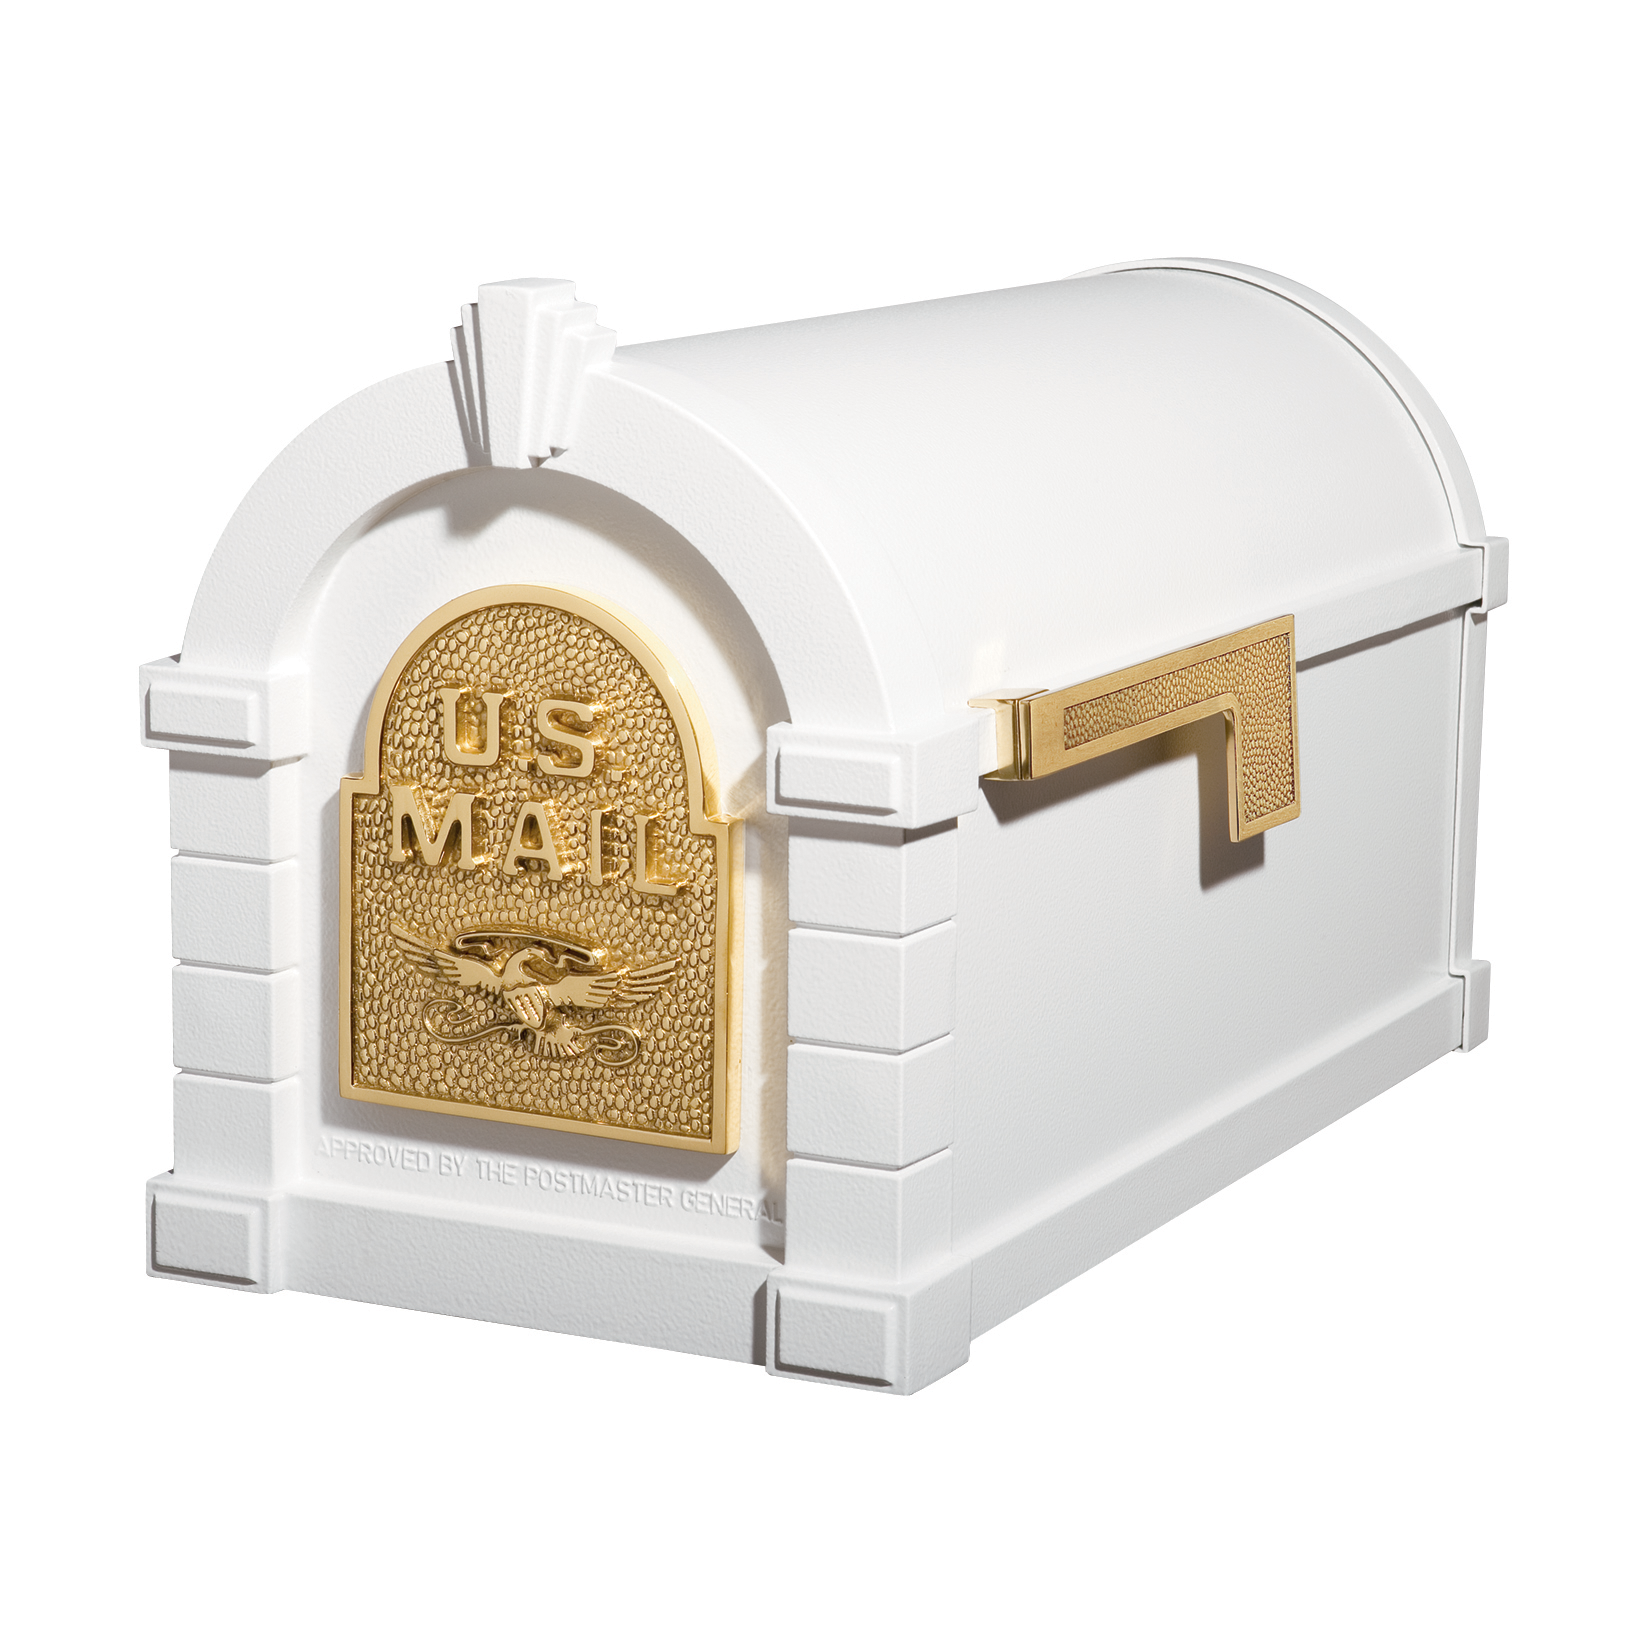 Gaines Eagle Keystone Mailboxes - White with Polished Brass